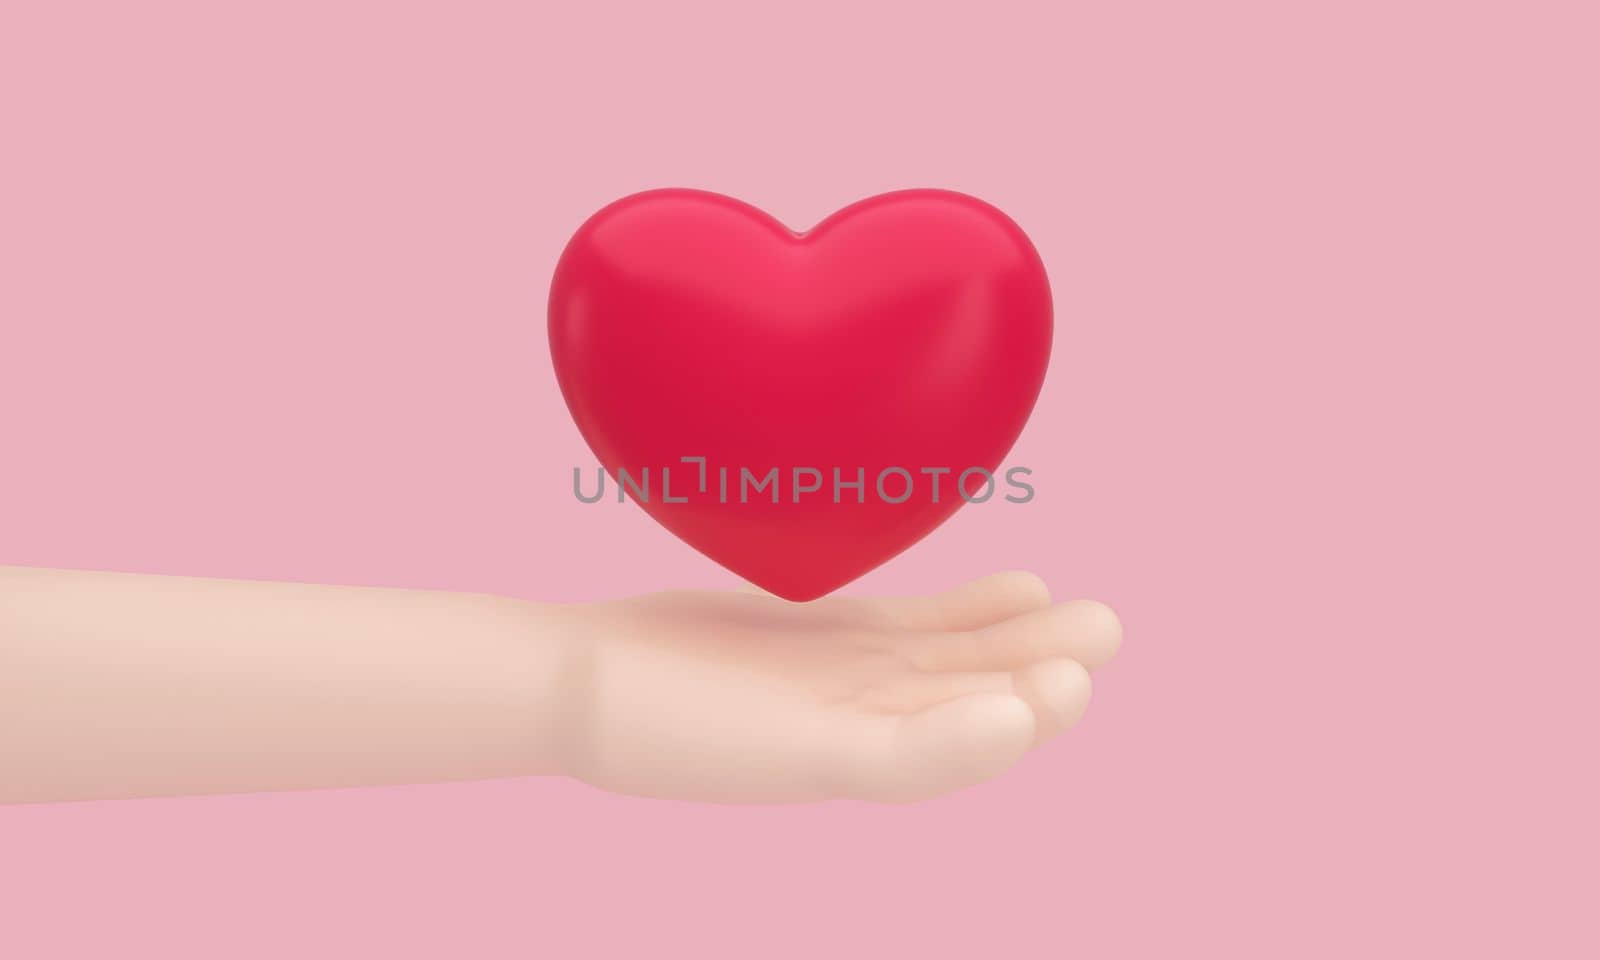 A heart on hand on pink background for Happy Mother's or Valentine's Day greeting card design. by ImagesRouges